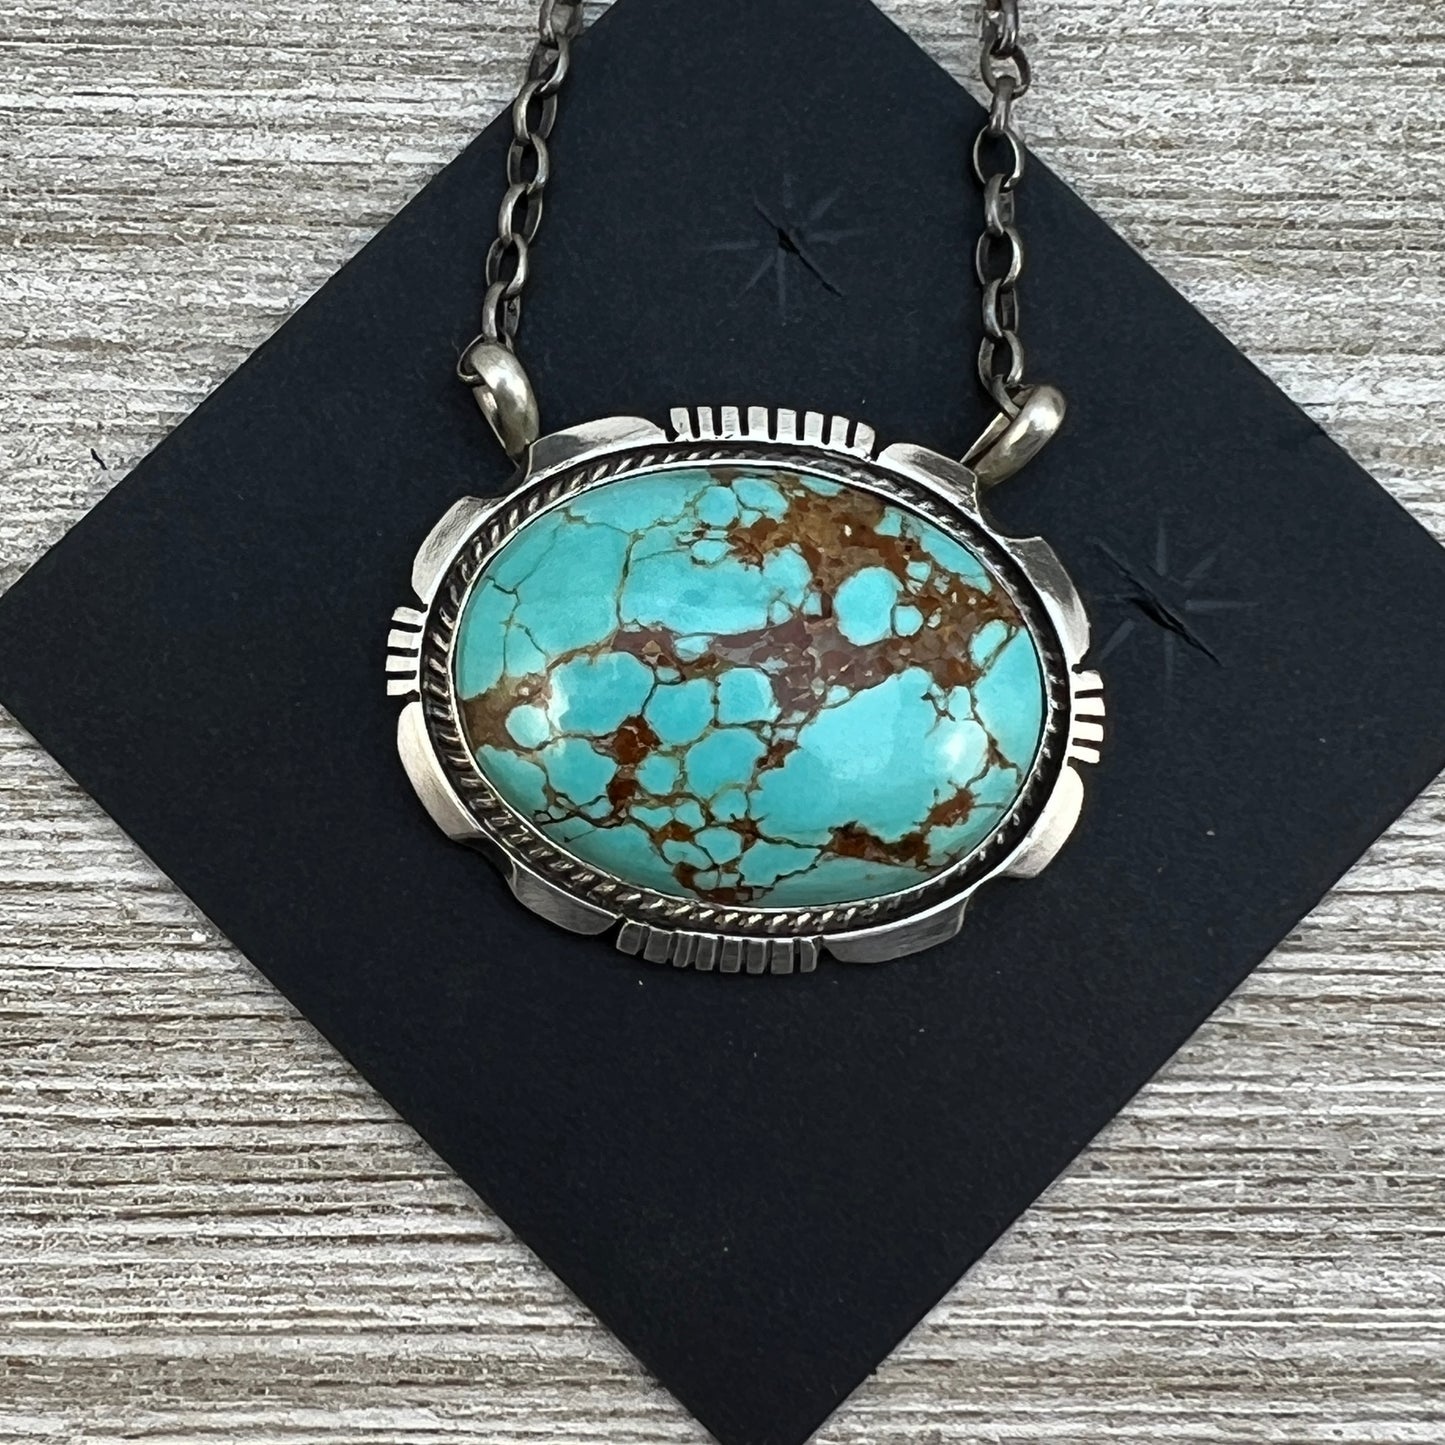 17" Spiderweb turquoise necklace #2, #8 turquoise, sterling silver choker, Navajo handmade by Alfred Martinez, signed